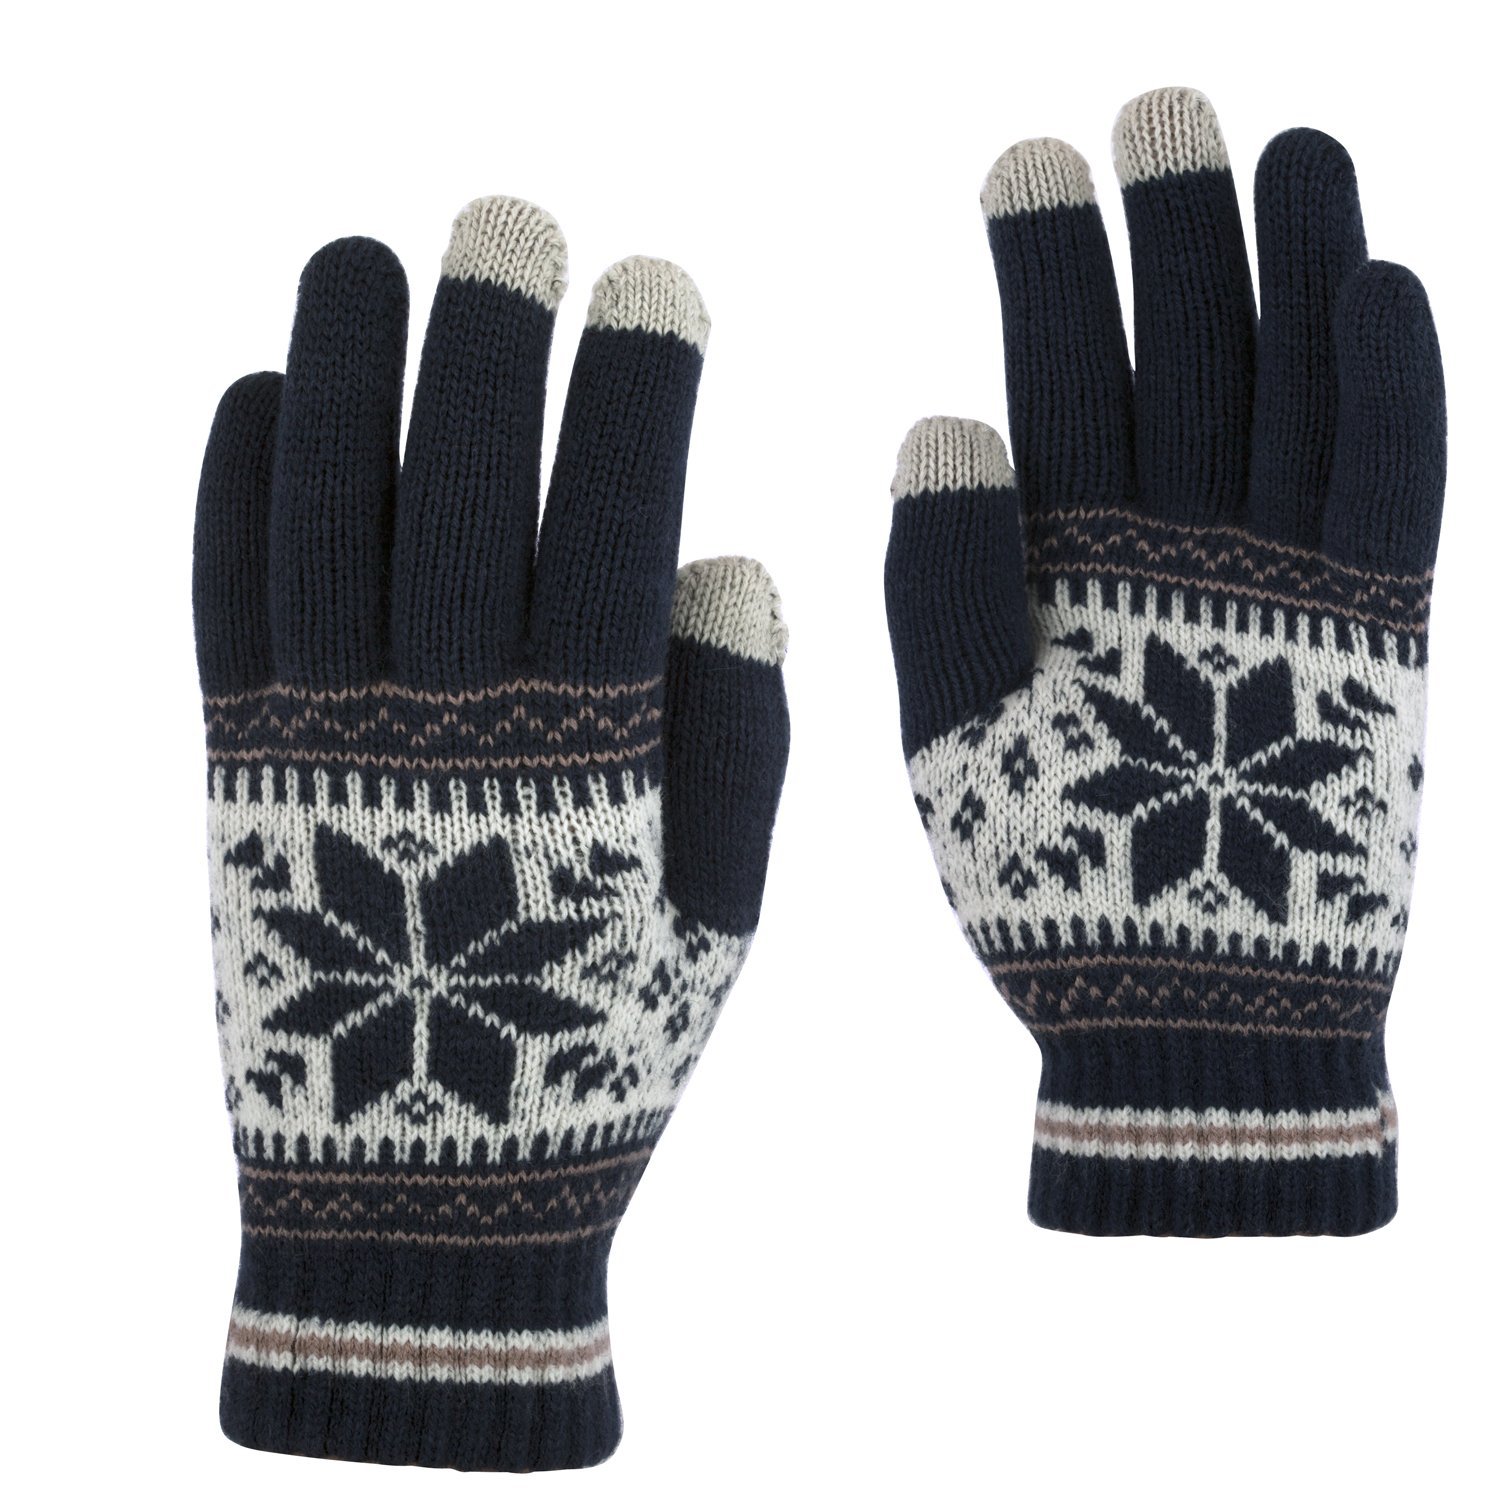 Belle Donne - Women's Touch Screen Gloves - Snow Flakes - Navy